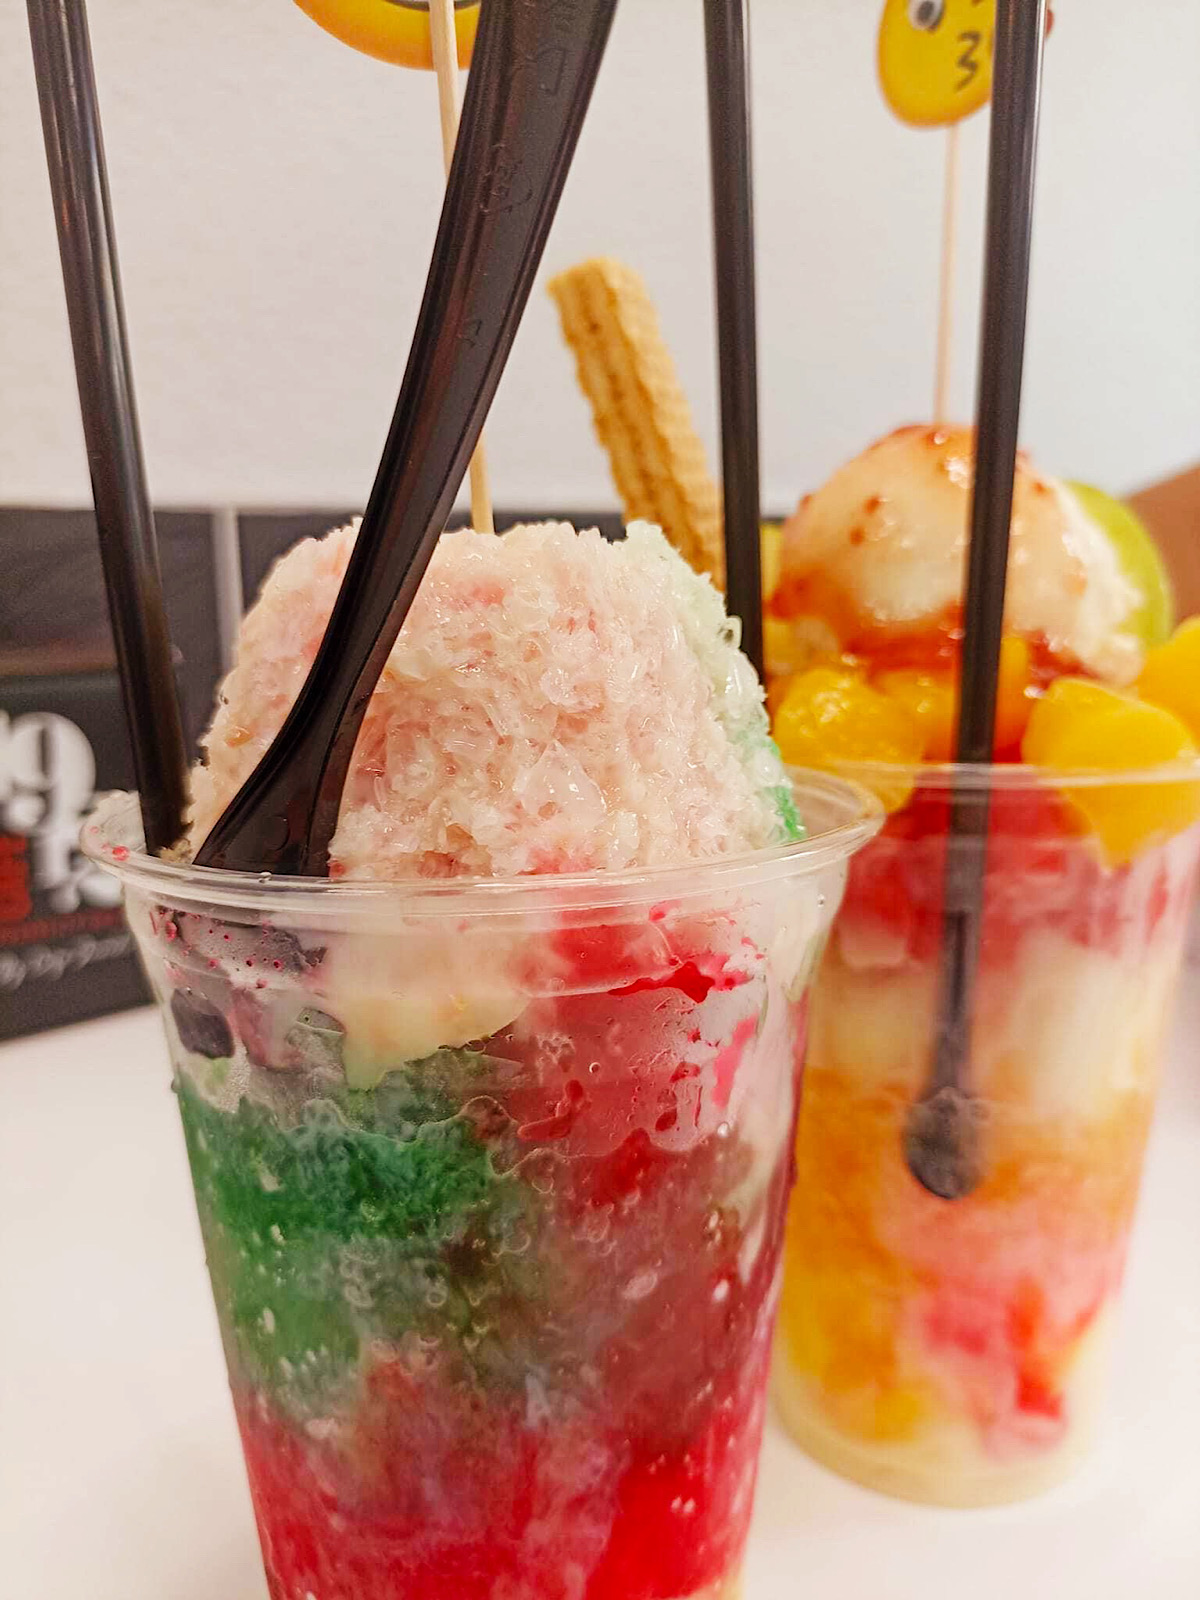 Two variations of raspado (like a fruit snow cone) from a cafe in Spain.